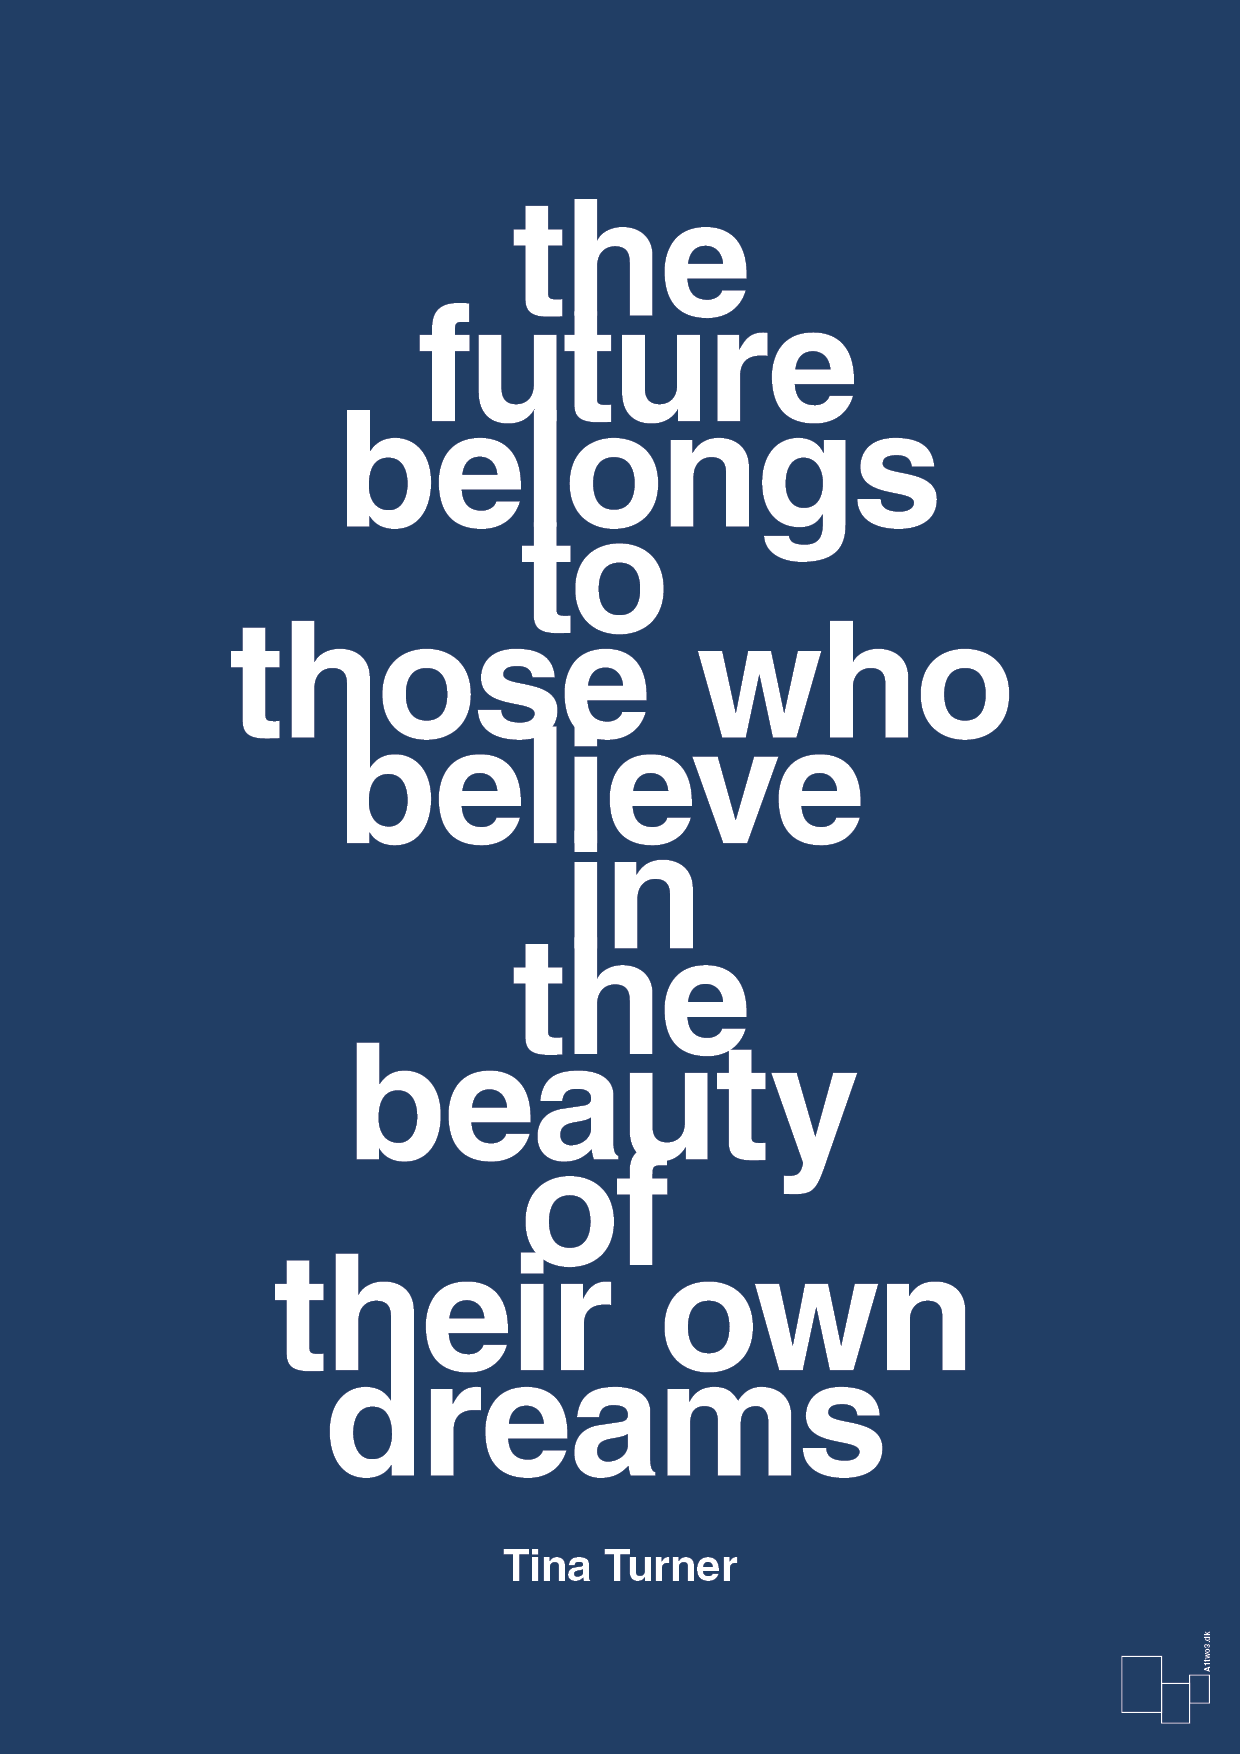 the future belongs to those who believe in the beauty of their own dreams - Plakat med Citater i Lapis Blue